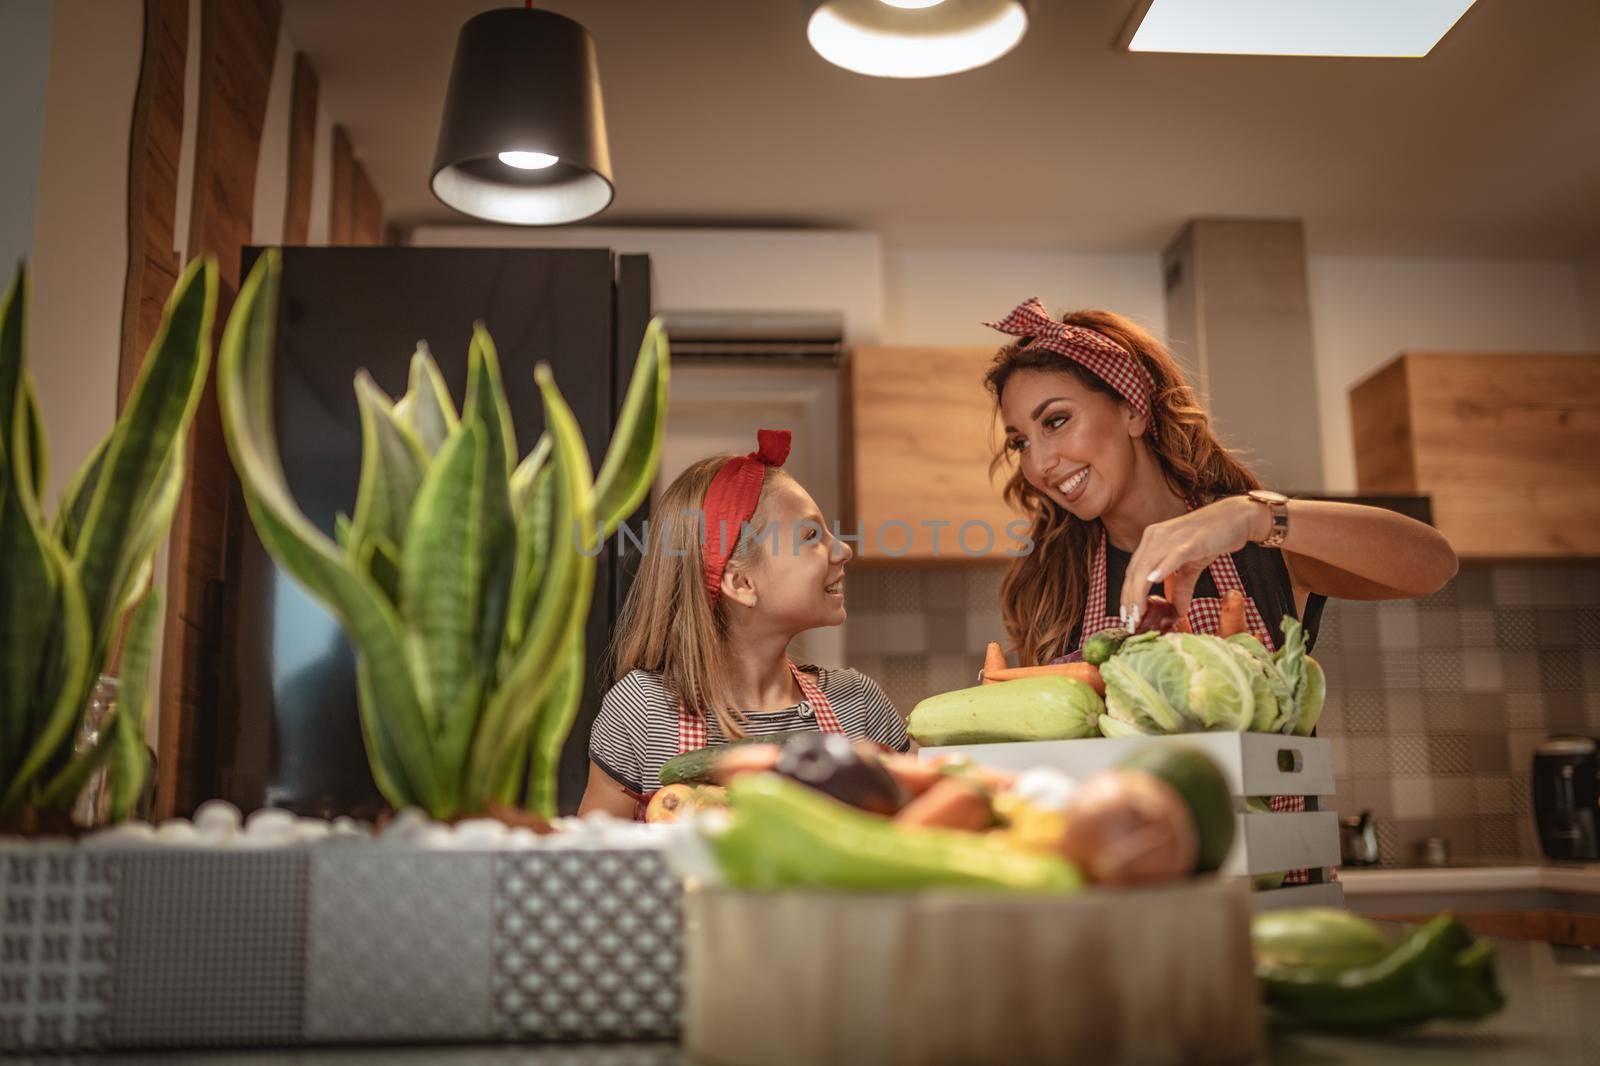 Happy mother and her daughter enjoy making and having healthy meal together at their home kitchen.